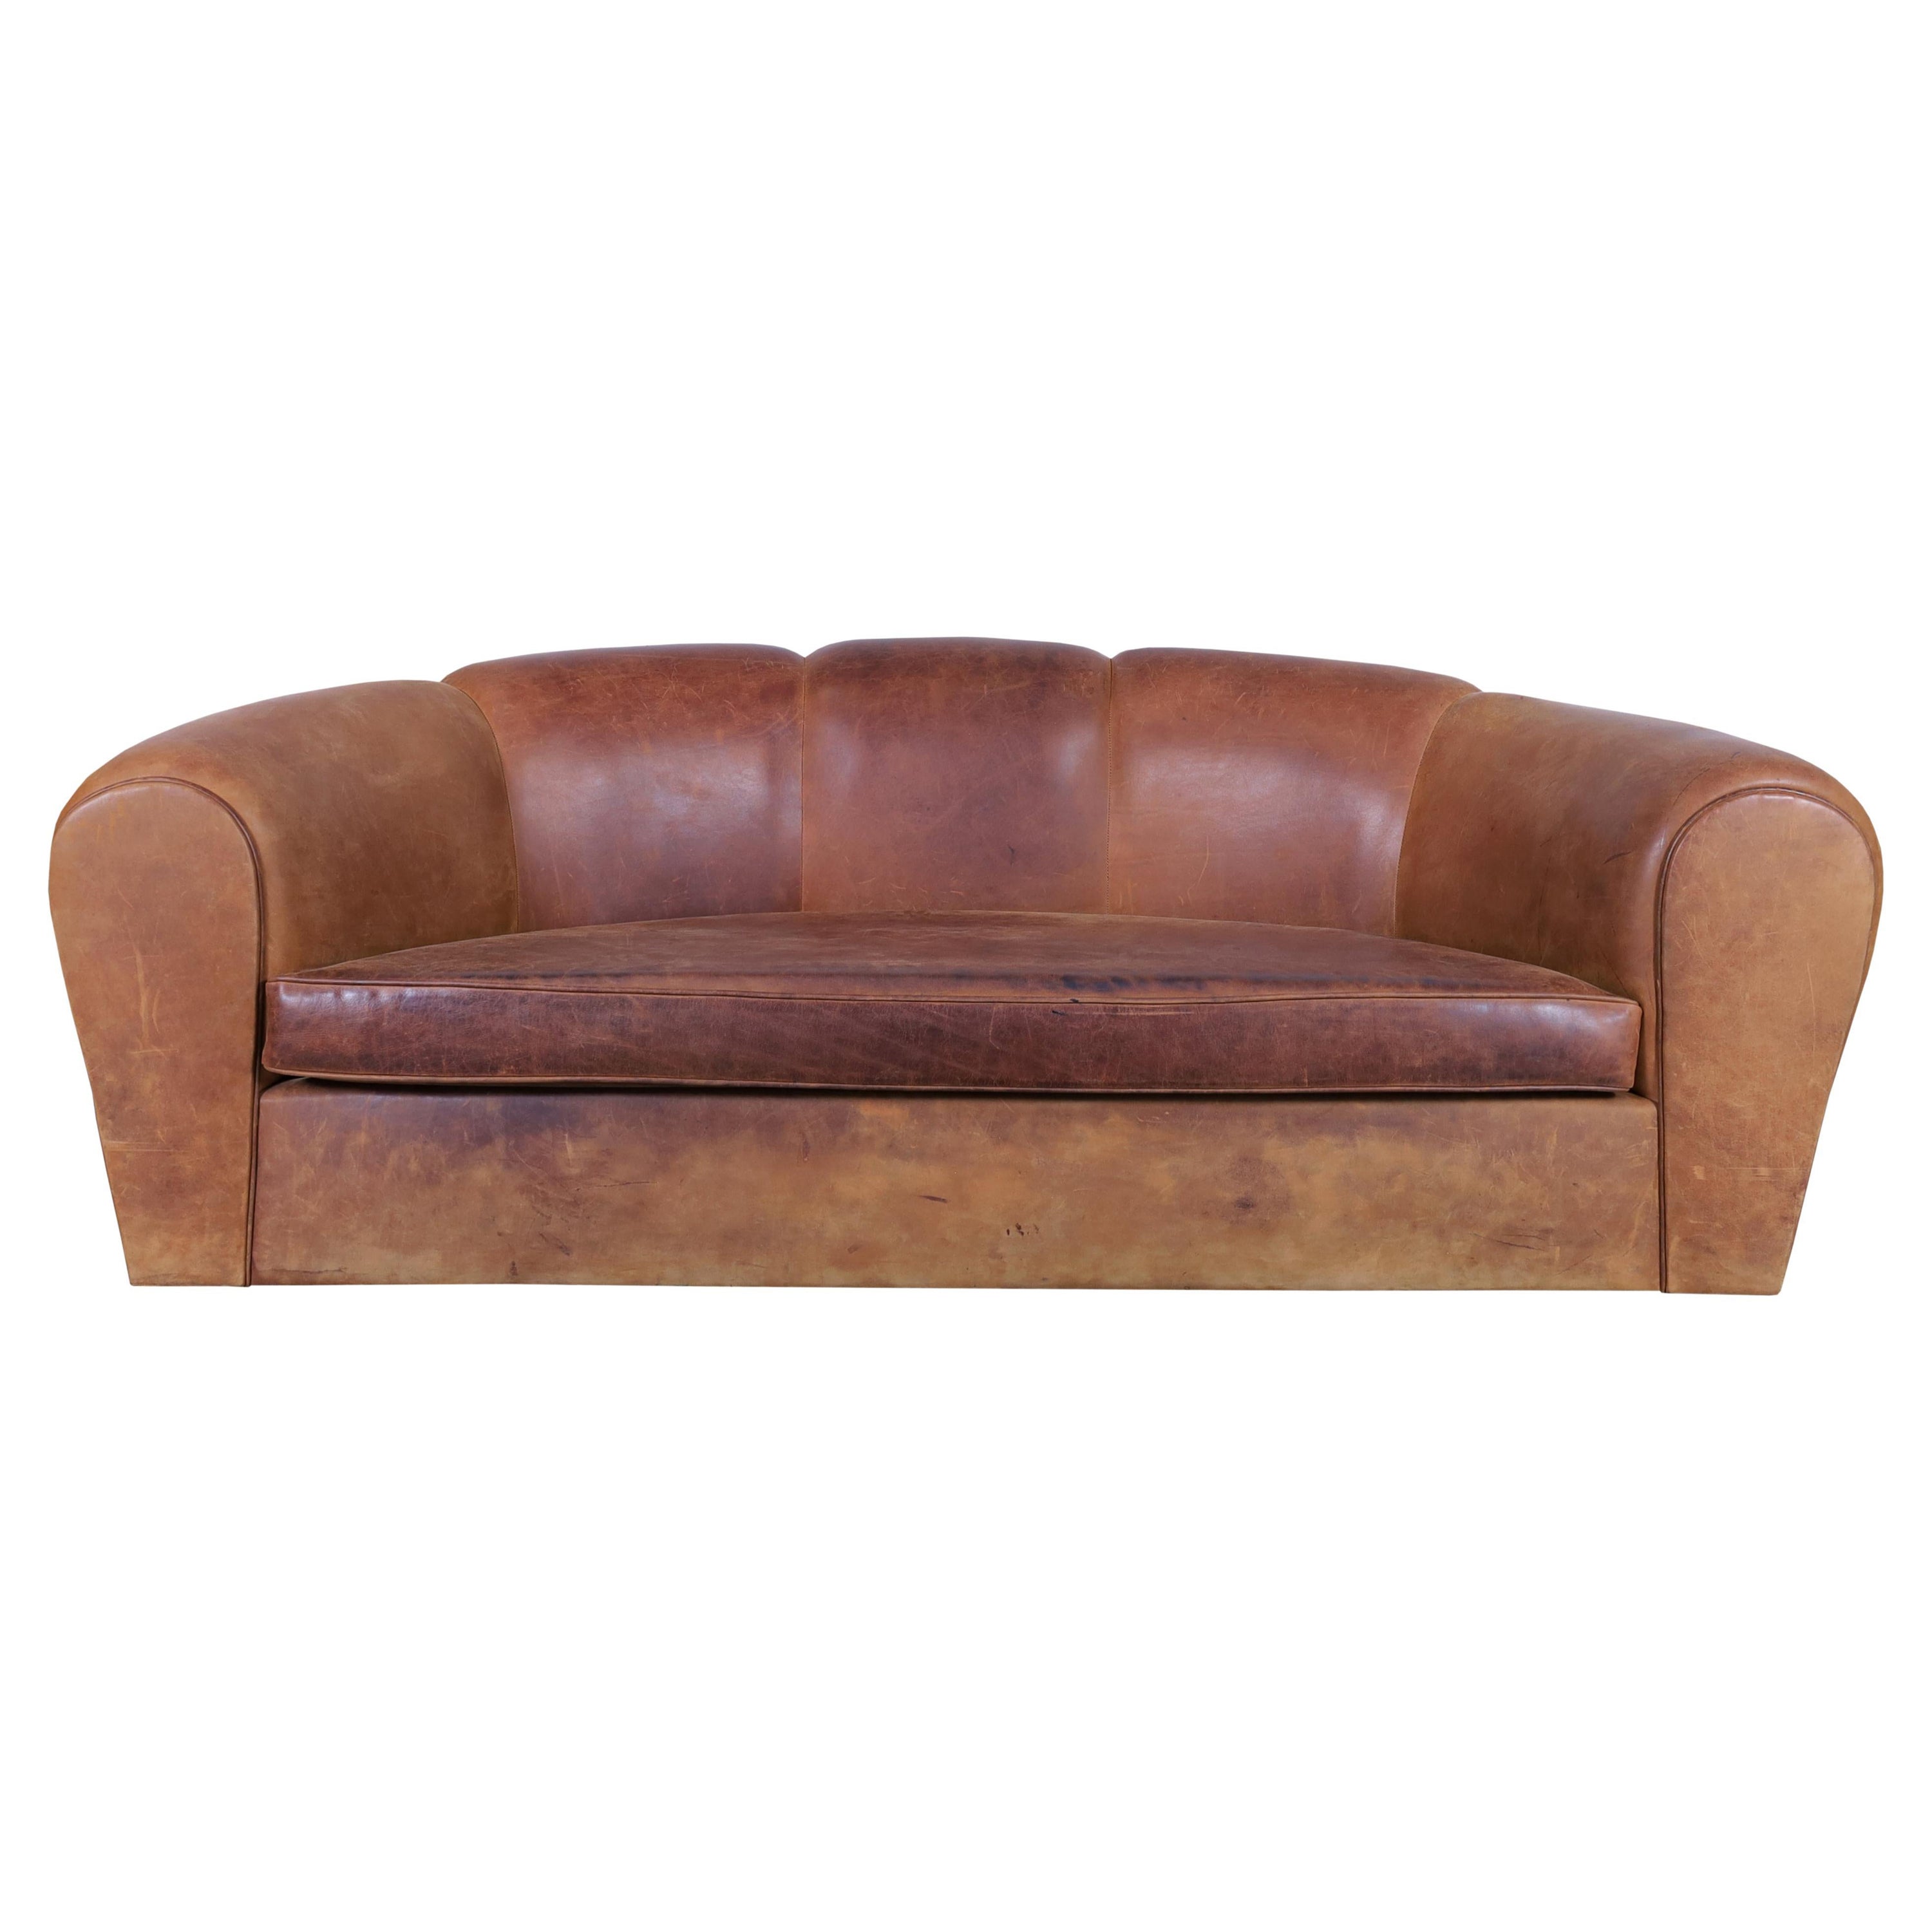 French Art Deco Leather "Croissant" Sofa